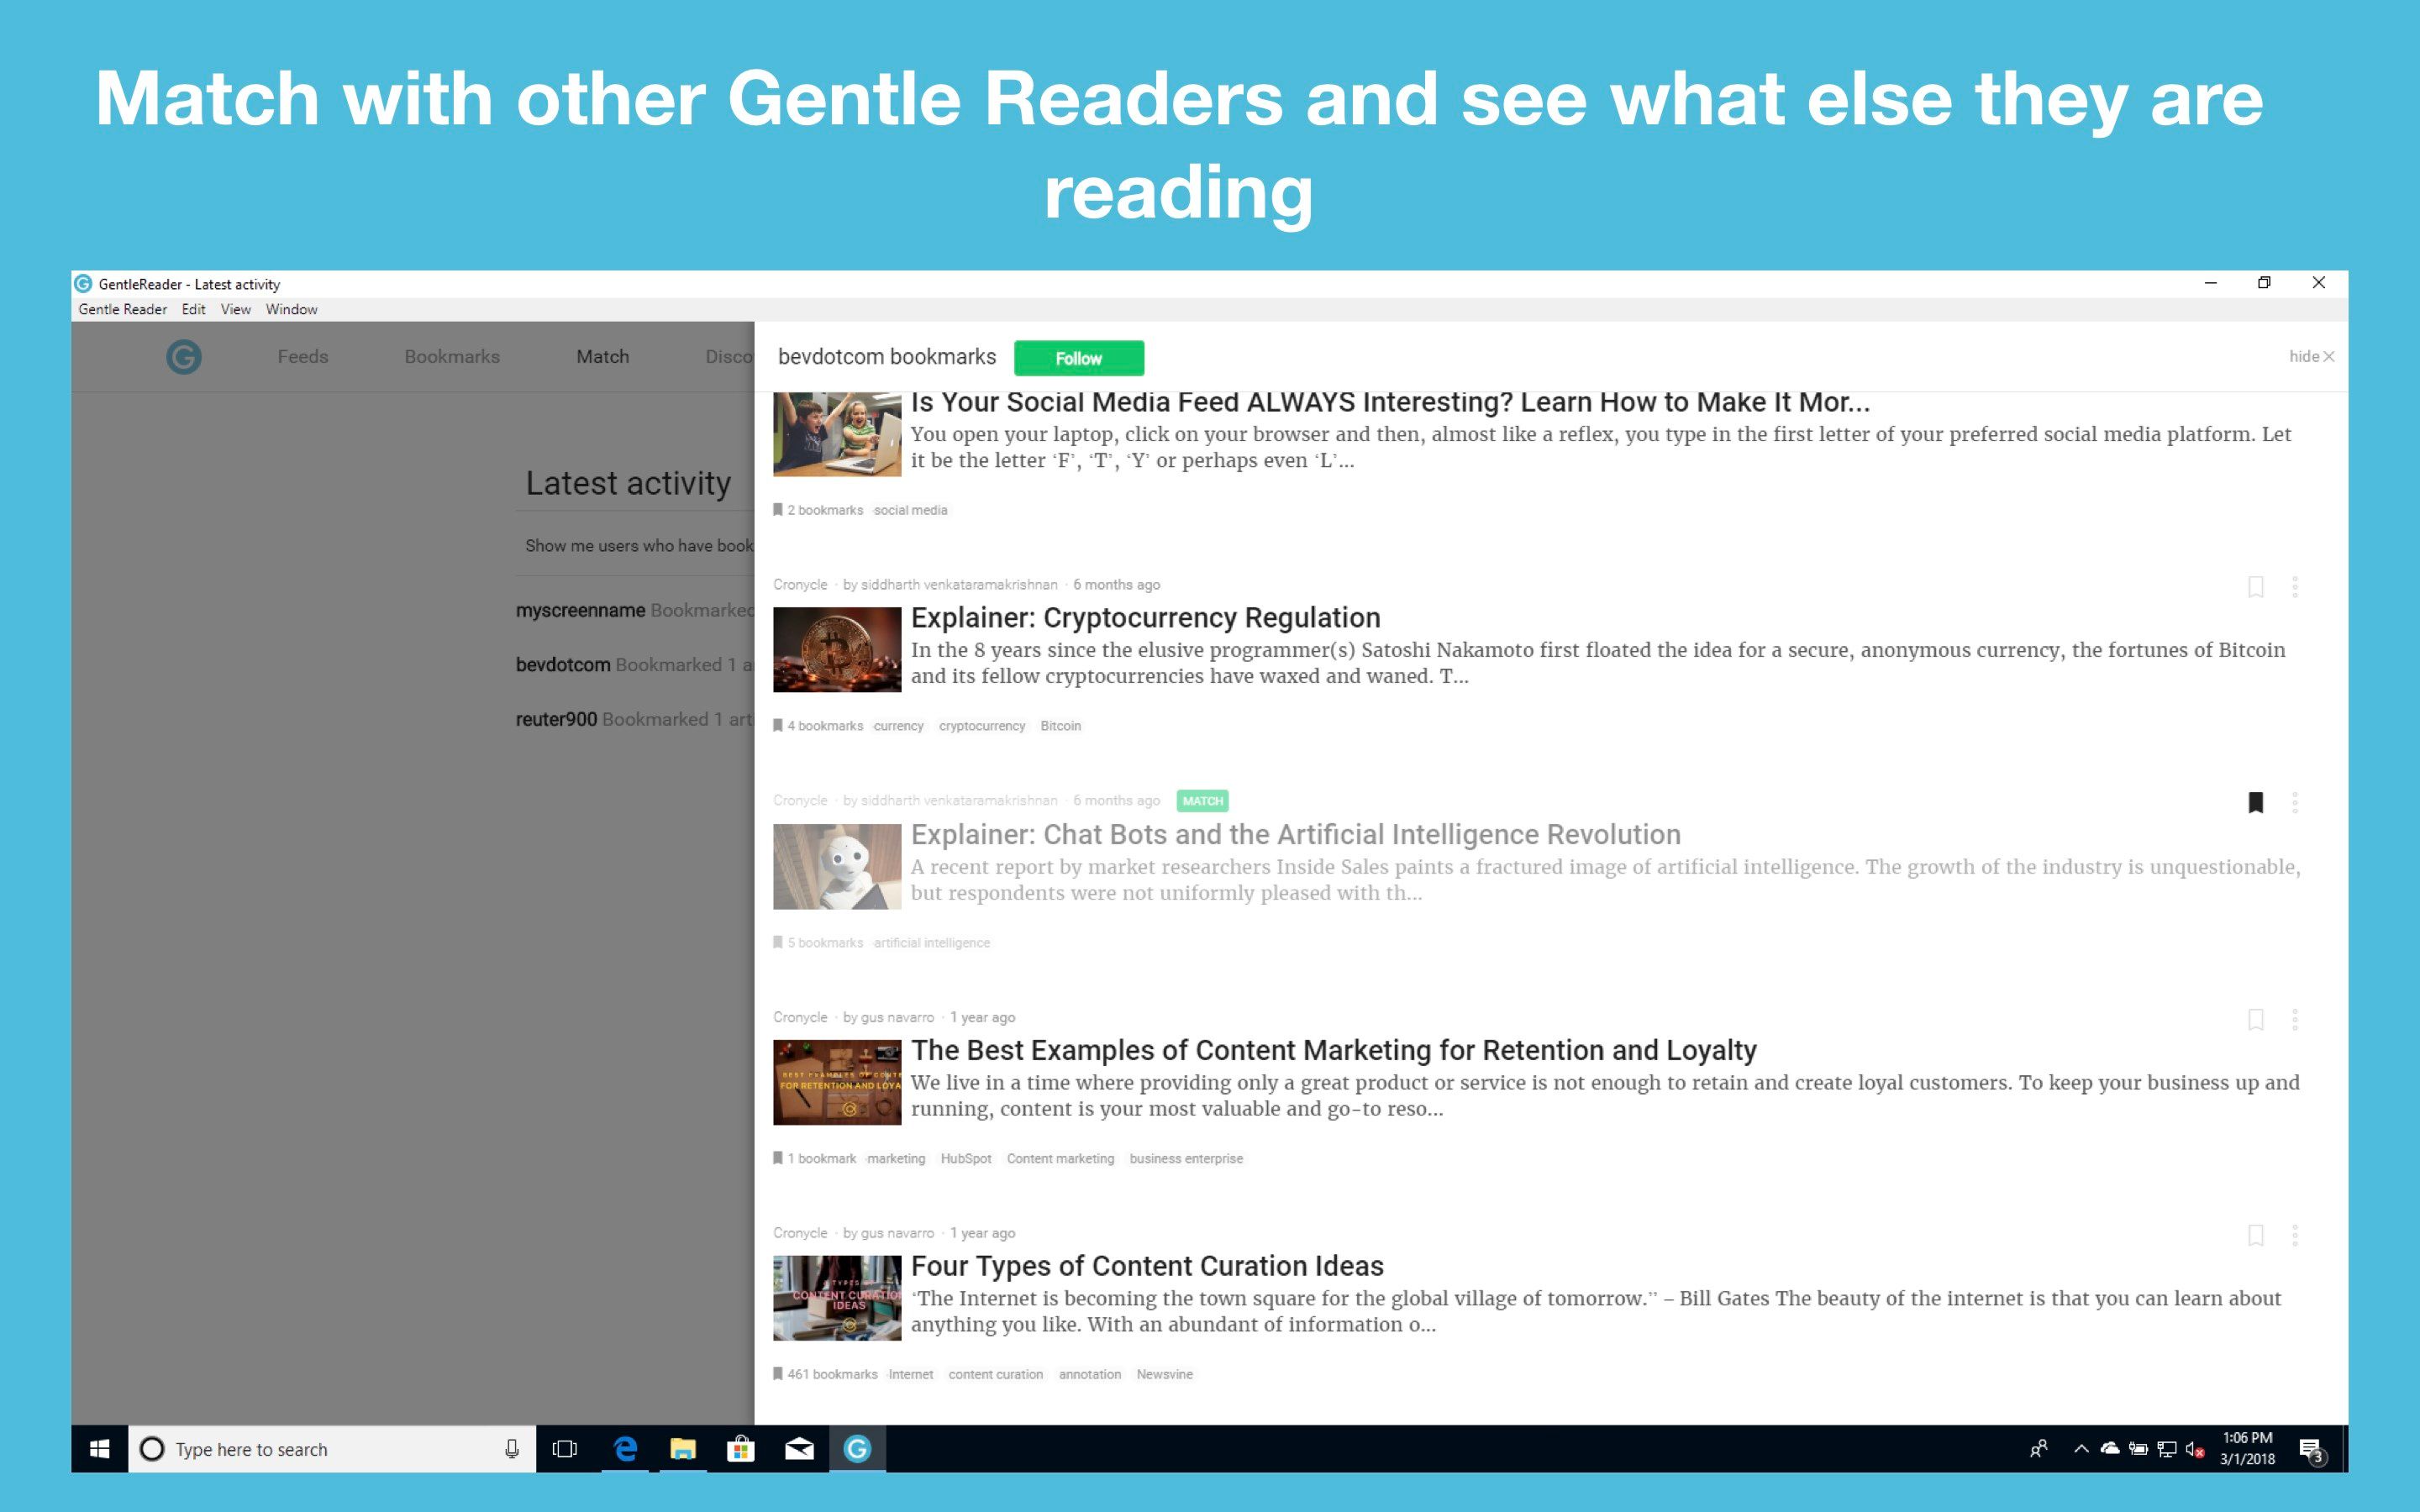 Match with other Gentle Readers and see what else they are reading